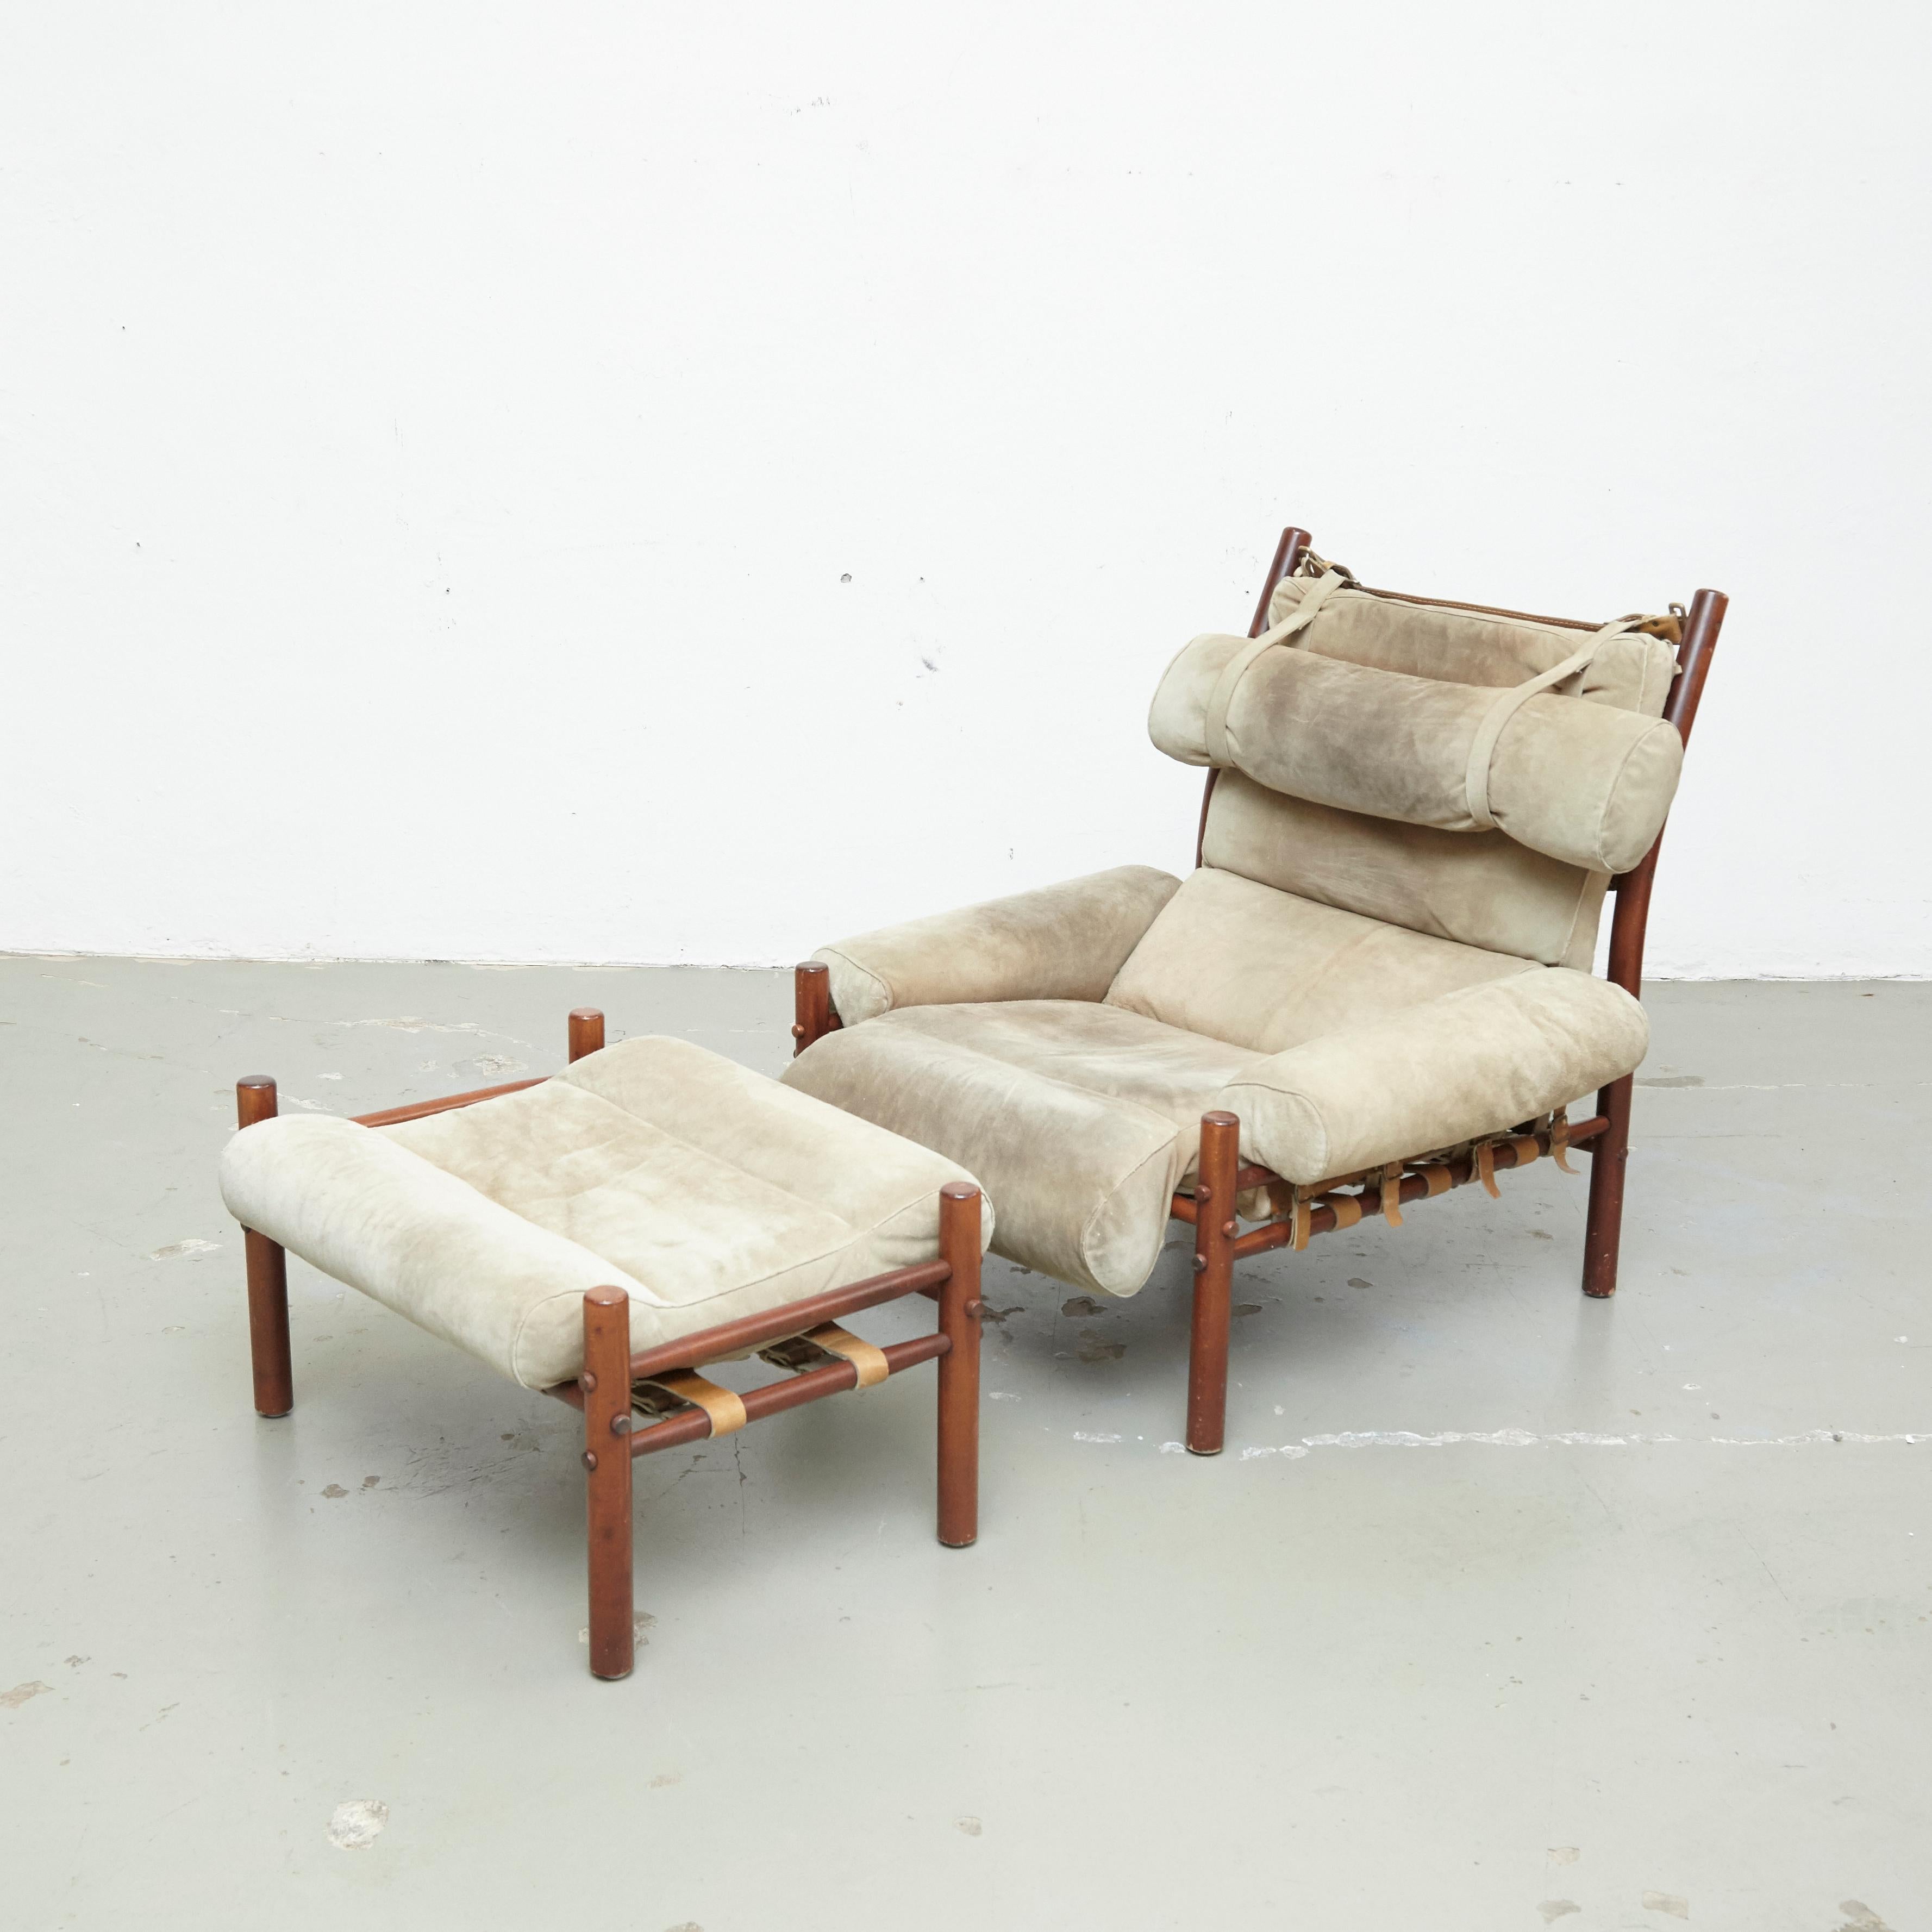 Arne Norell Inca easychair and ottoman manufactured by Norell Mobel, Sweden circa 1970.

In original condition, preserving a beautiful patina. 

Arne Norell (1917-1971) was a Swedish furniture designer. In 1958, he founded MöBel AB Arne Norell